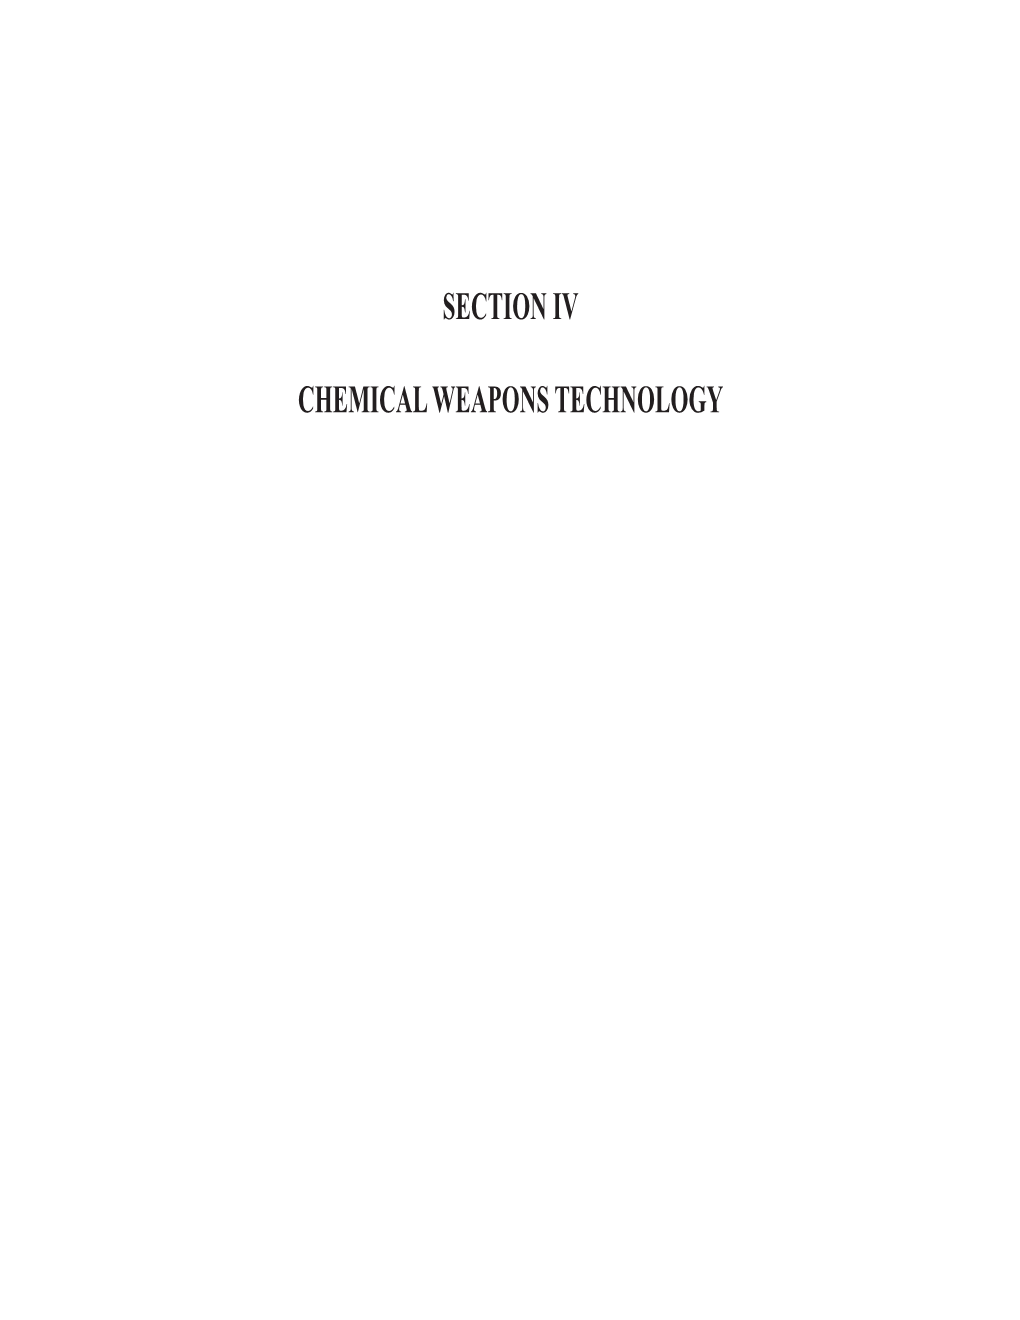 Chemical Weapons Technology Section 4—Chemical Weapons Technology